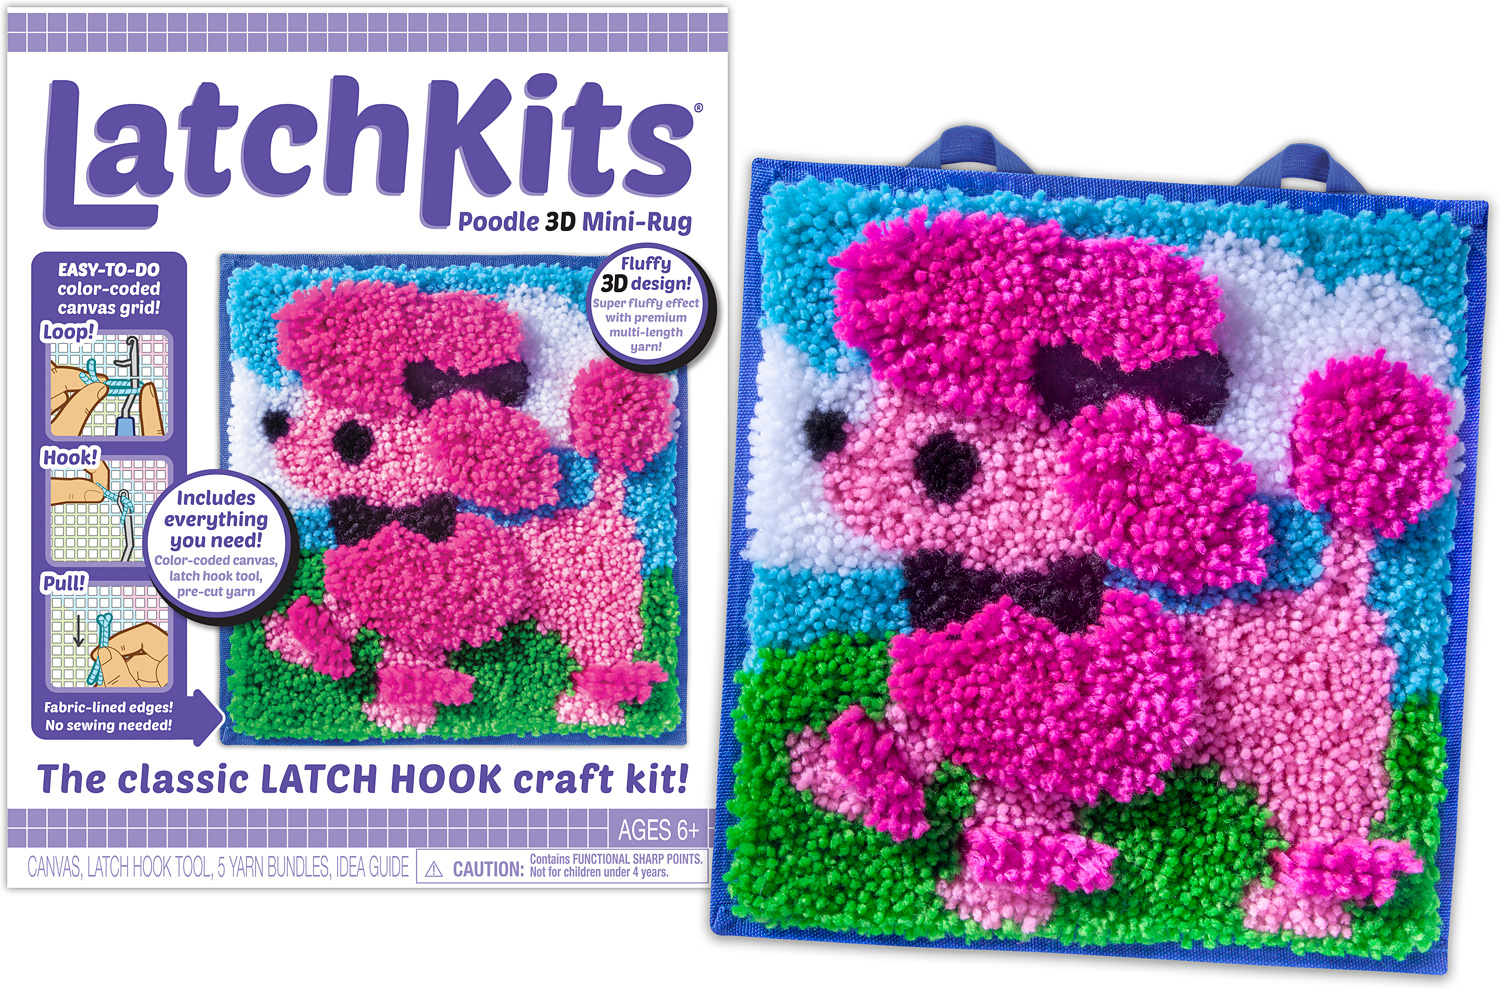 Latchkits 3D Poodle Craft Kit - The Toy Chest at the Nutshell